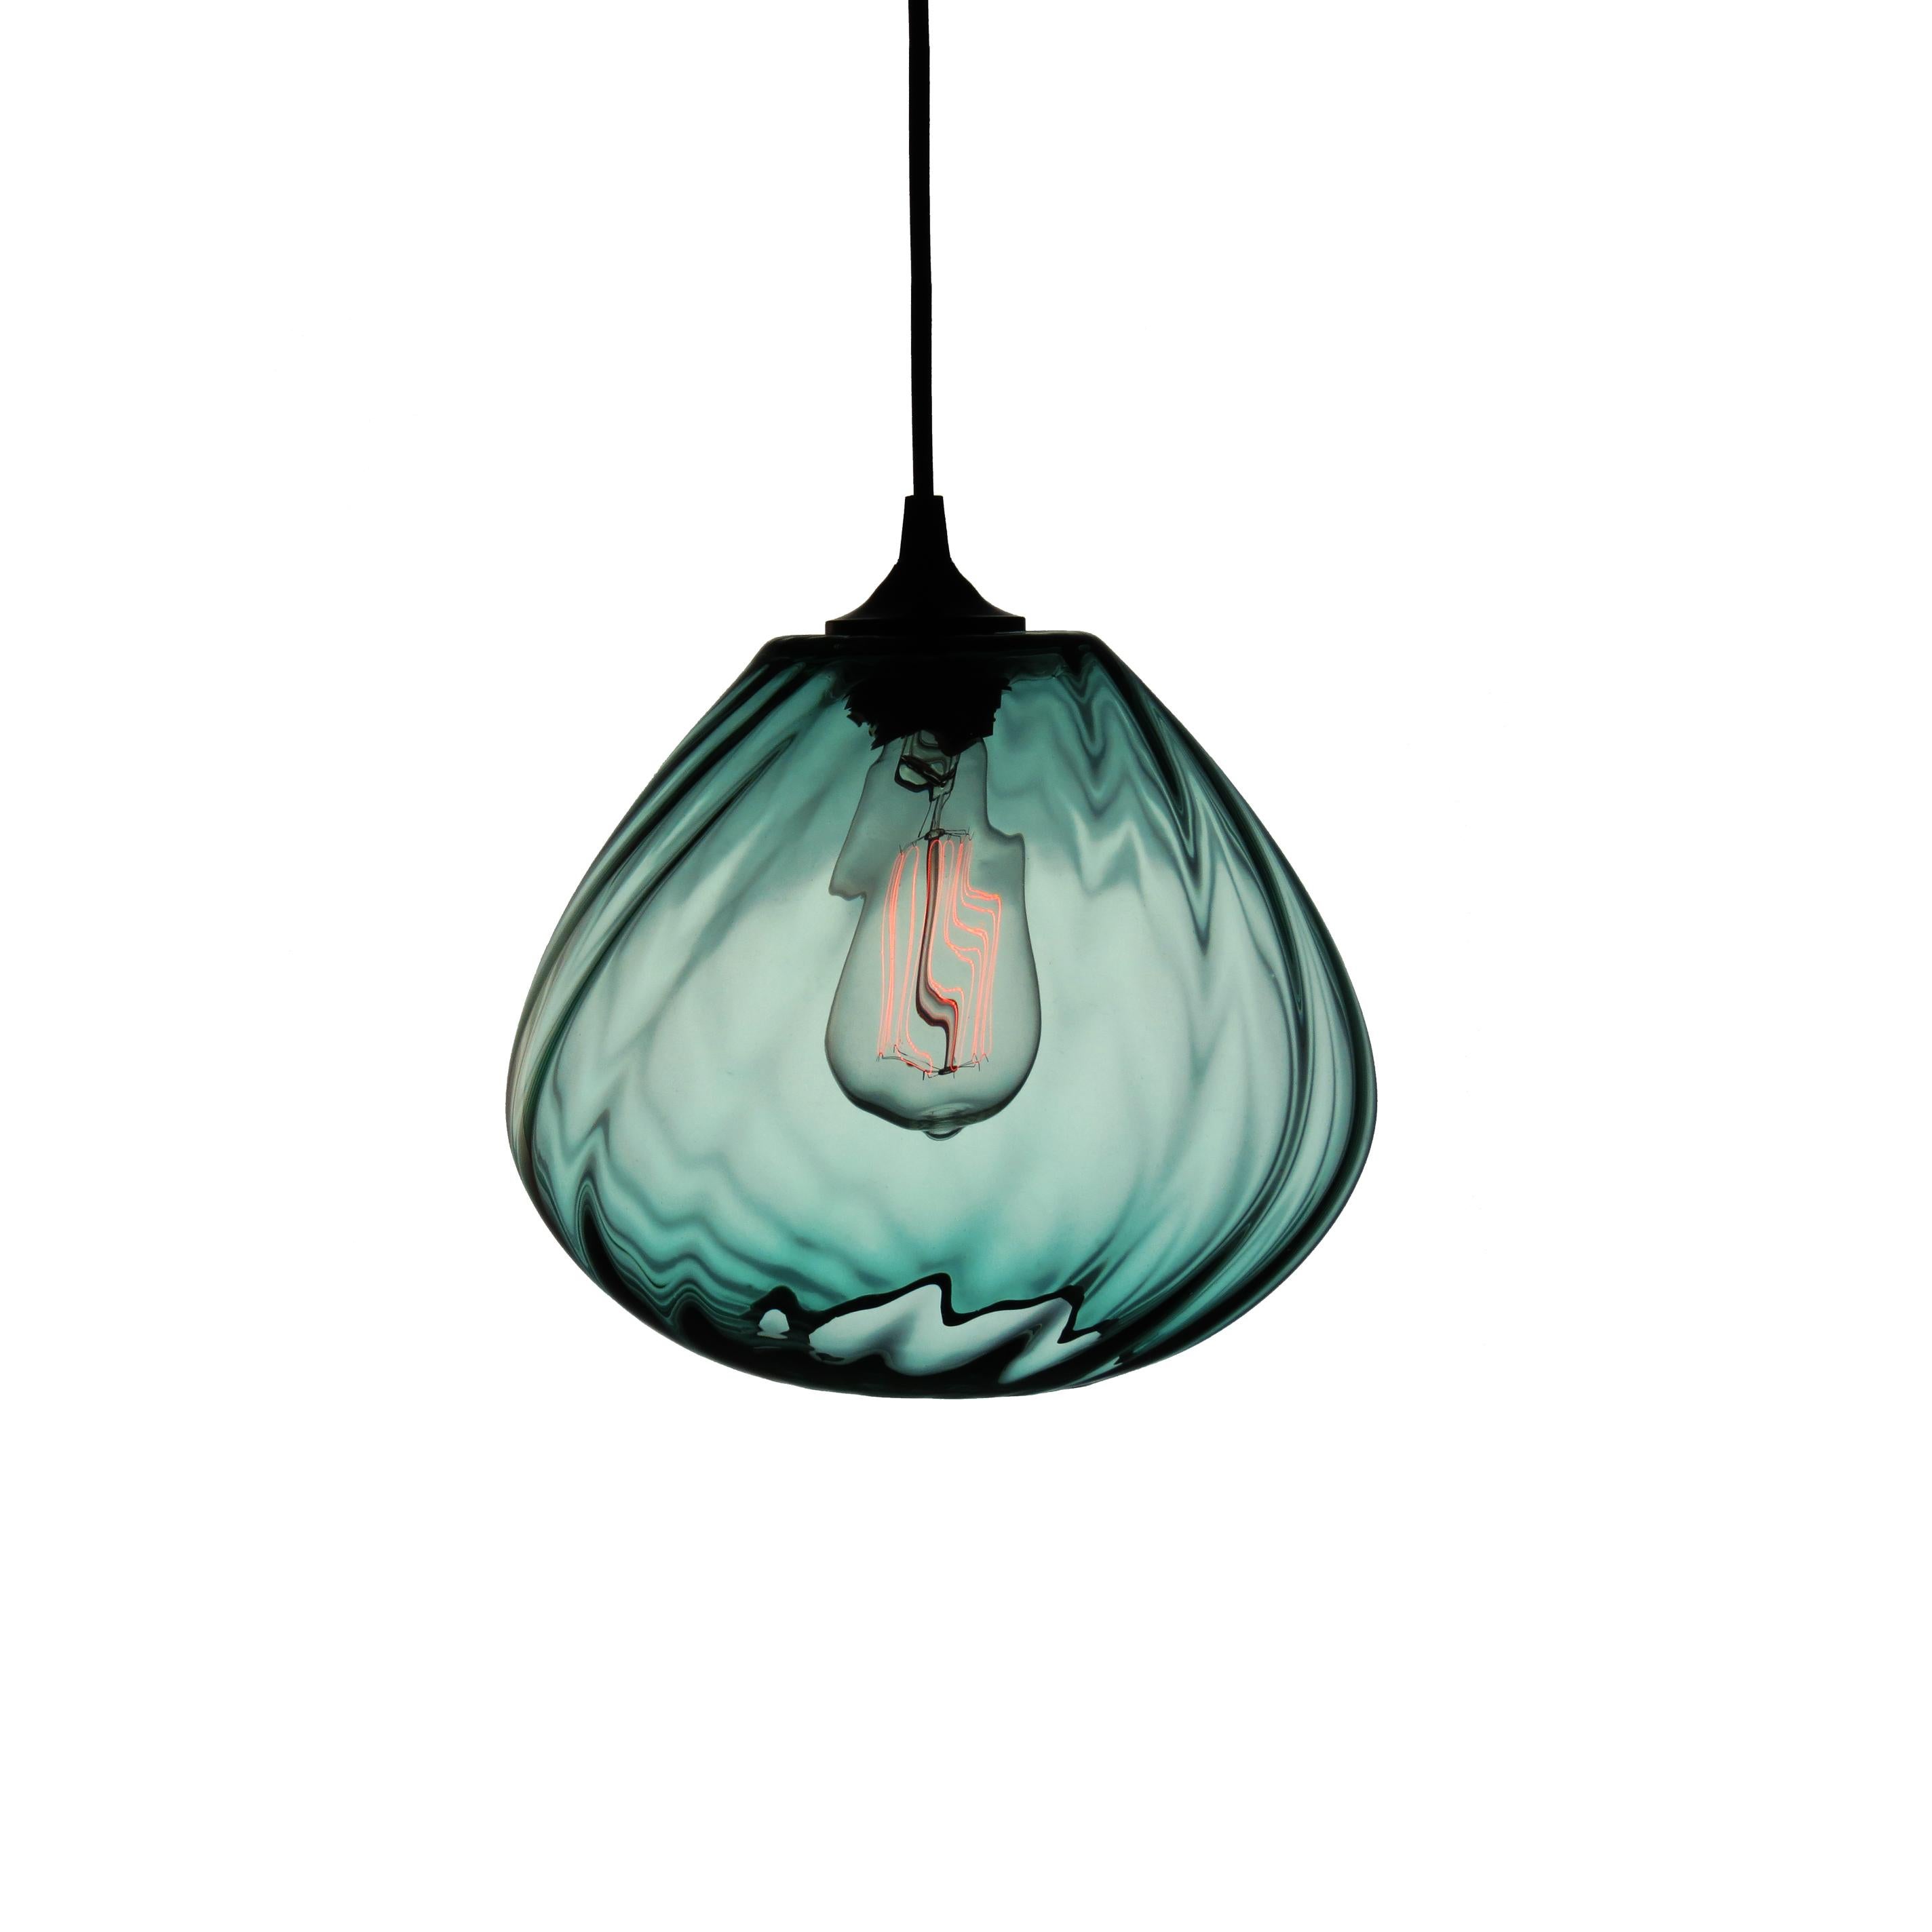 Transparent Hand Blown Glass Architectural Pendant Lamp with Optical Effect For Sale 5